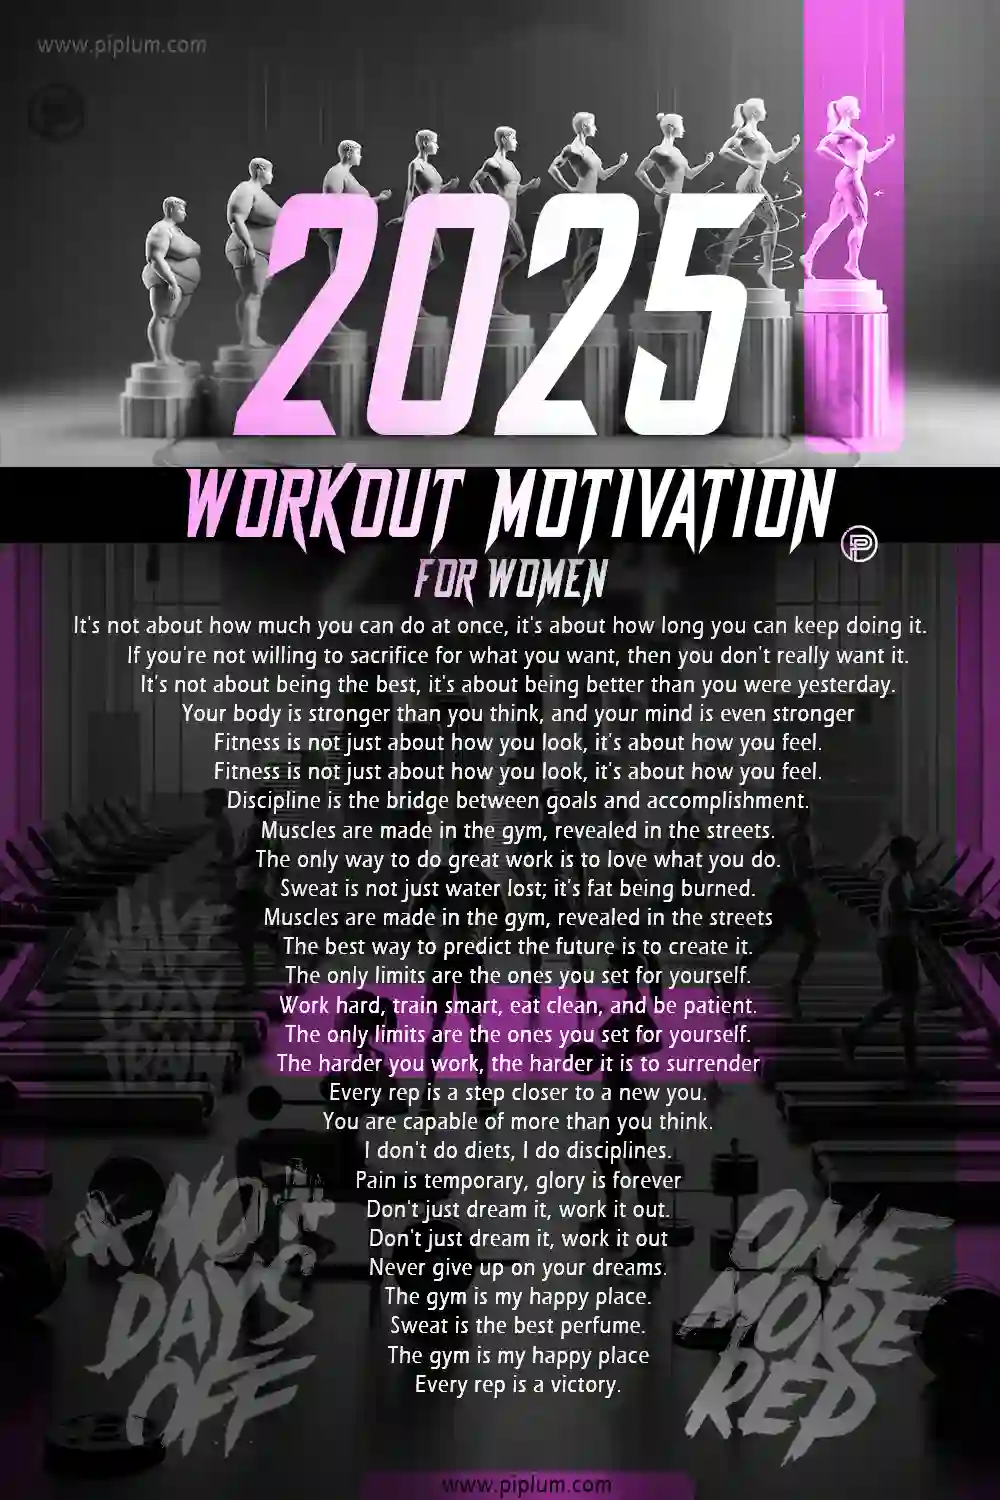 Workout-motivation-for-women-2025-poster